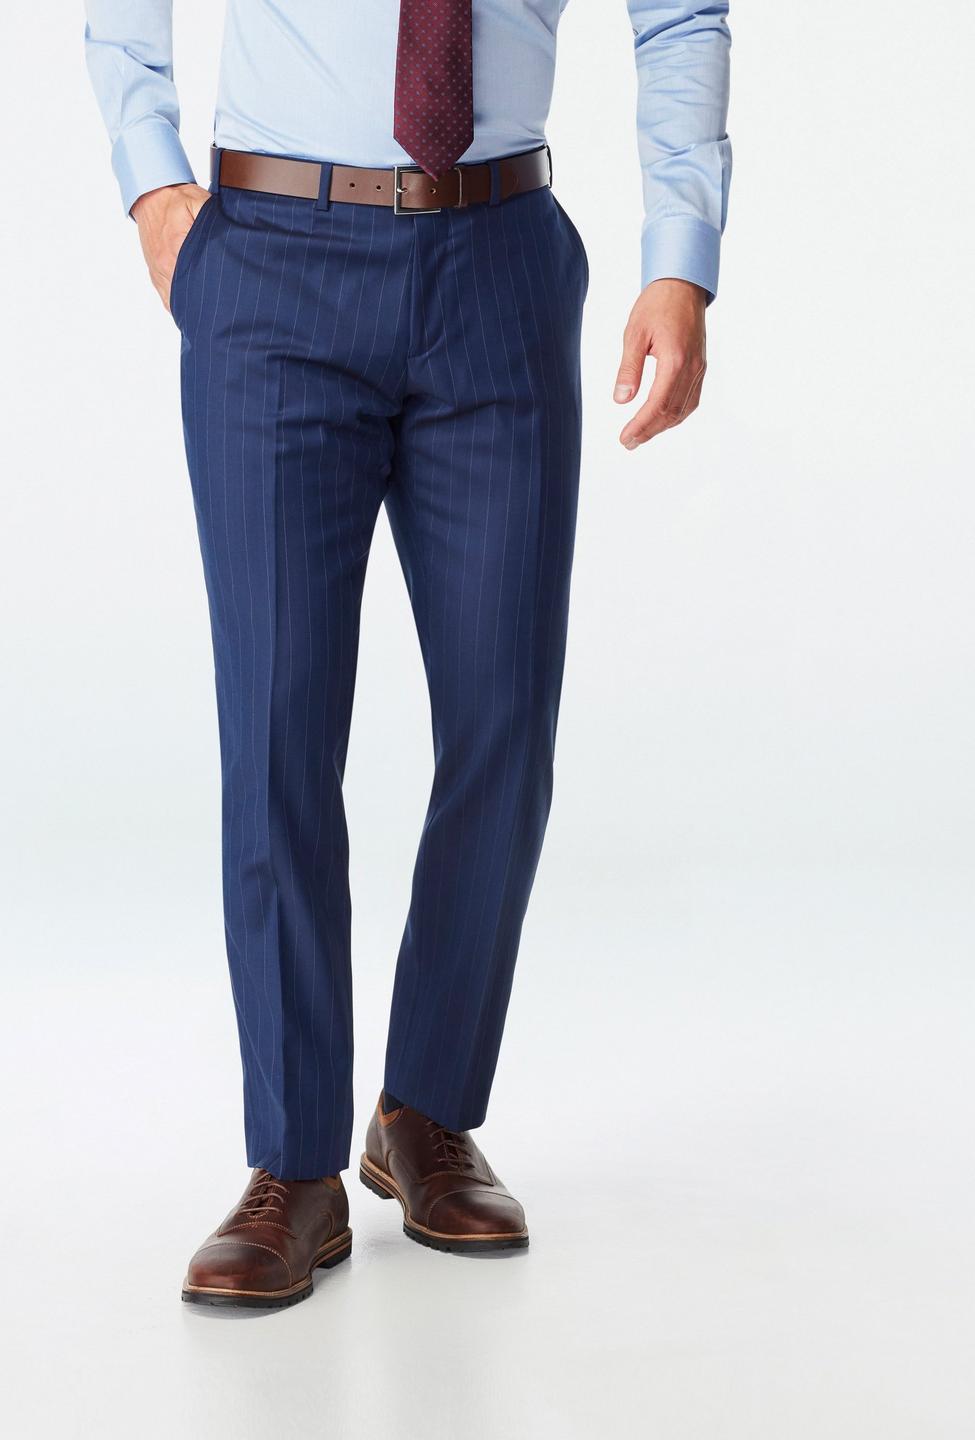 Blue pants - Hemsworth Striped Design from Premium Indochino Collection